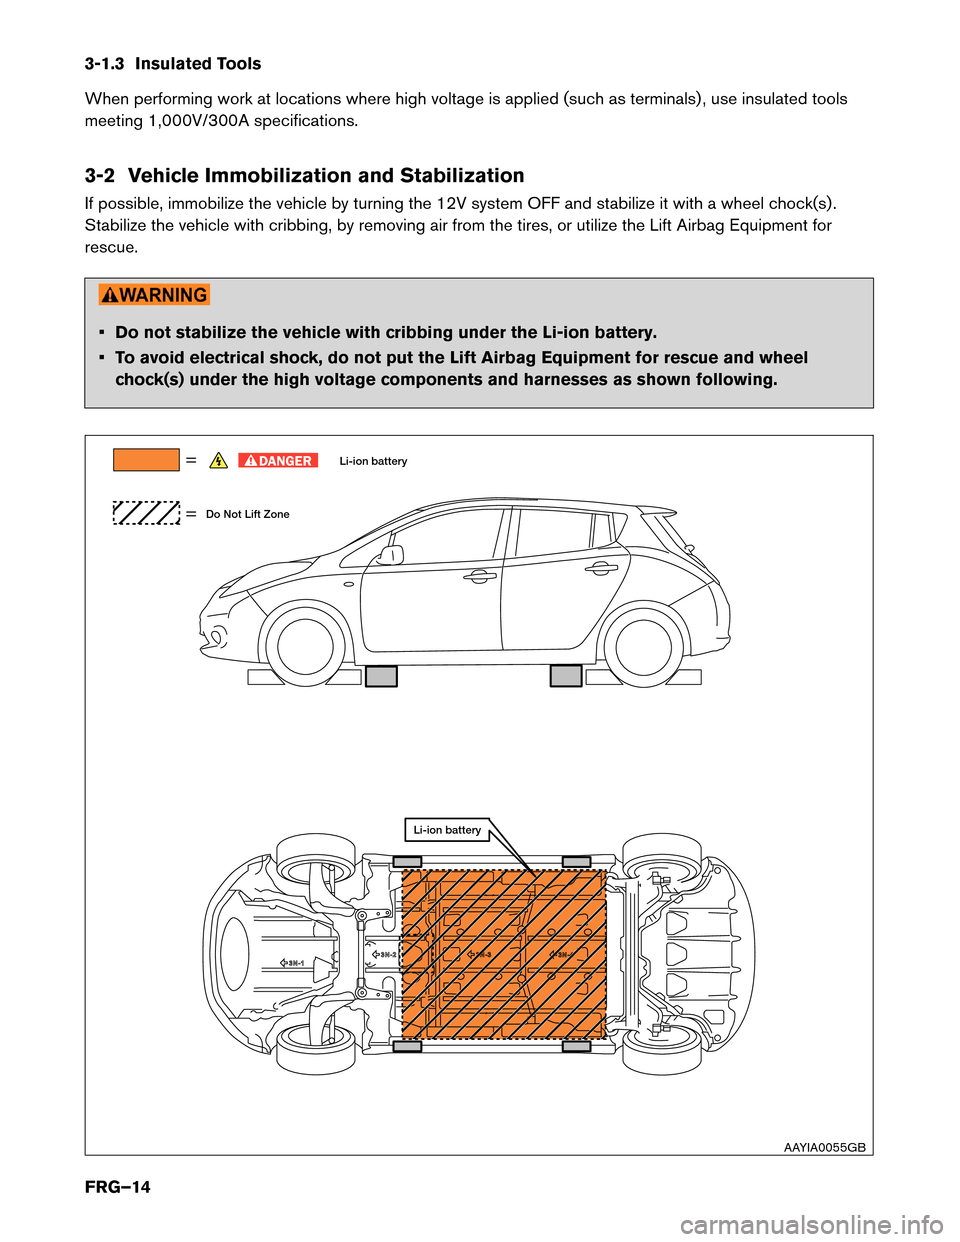 NISSAN LEAF 2014 1.G First Responders Guide 3-1.3 Insulated Tools
When
performing work at locations where high voltage is applied (such as terminals) , use insulated tools
meeting 1,000V/300A specifications.
3-2 Vehicle Immobilization and Stabi